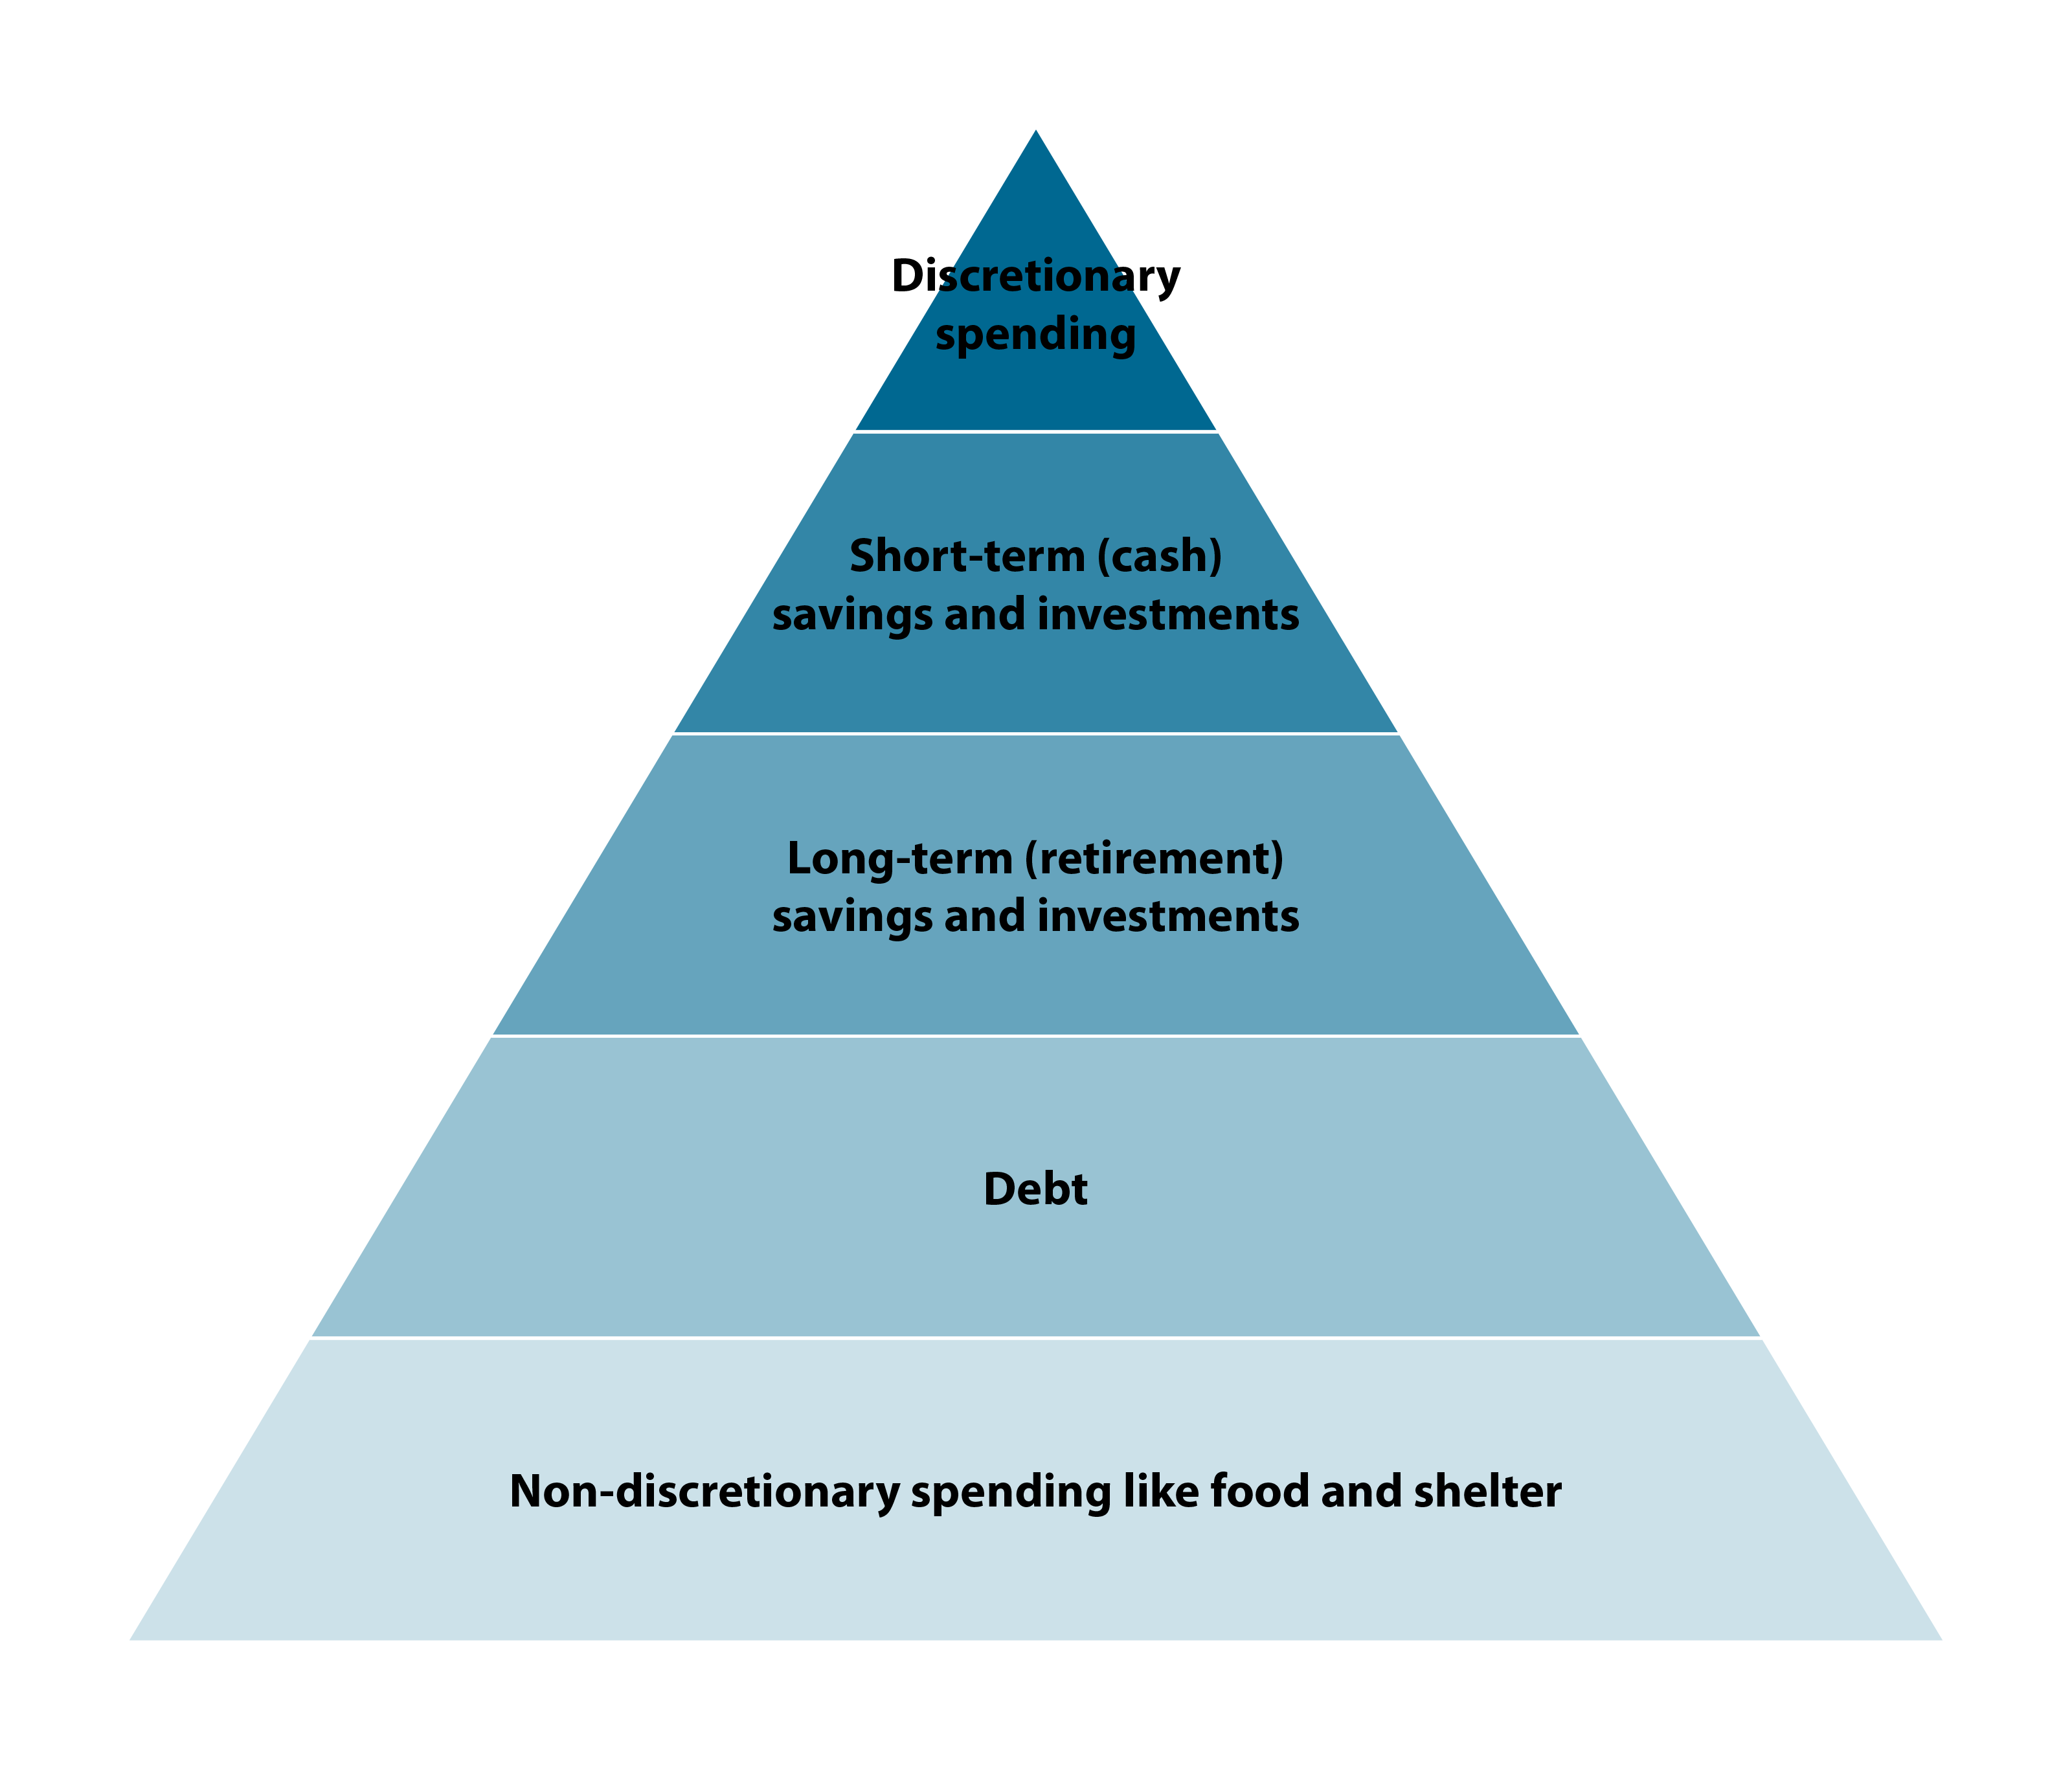 Financial Planning Pyramid showing (from bottom to top): Non-discretionary spending like food and shelter, debt, long-term (retirement) savings and investments, short-term (cash) savings and investments, discretionary spending